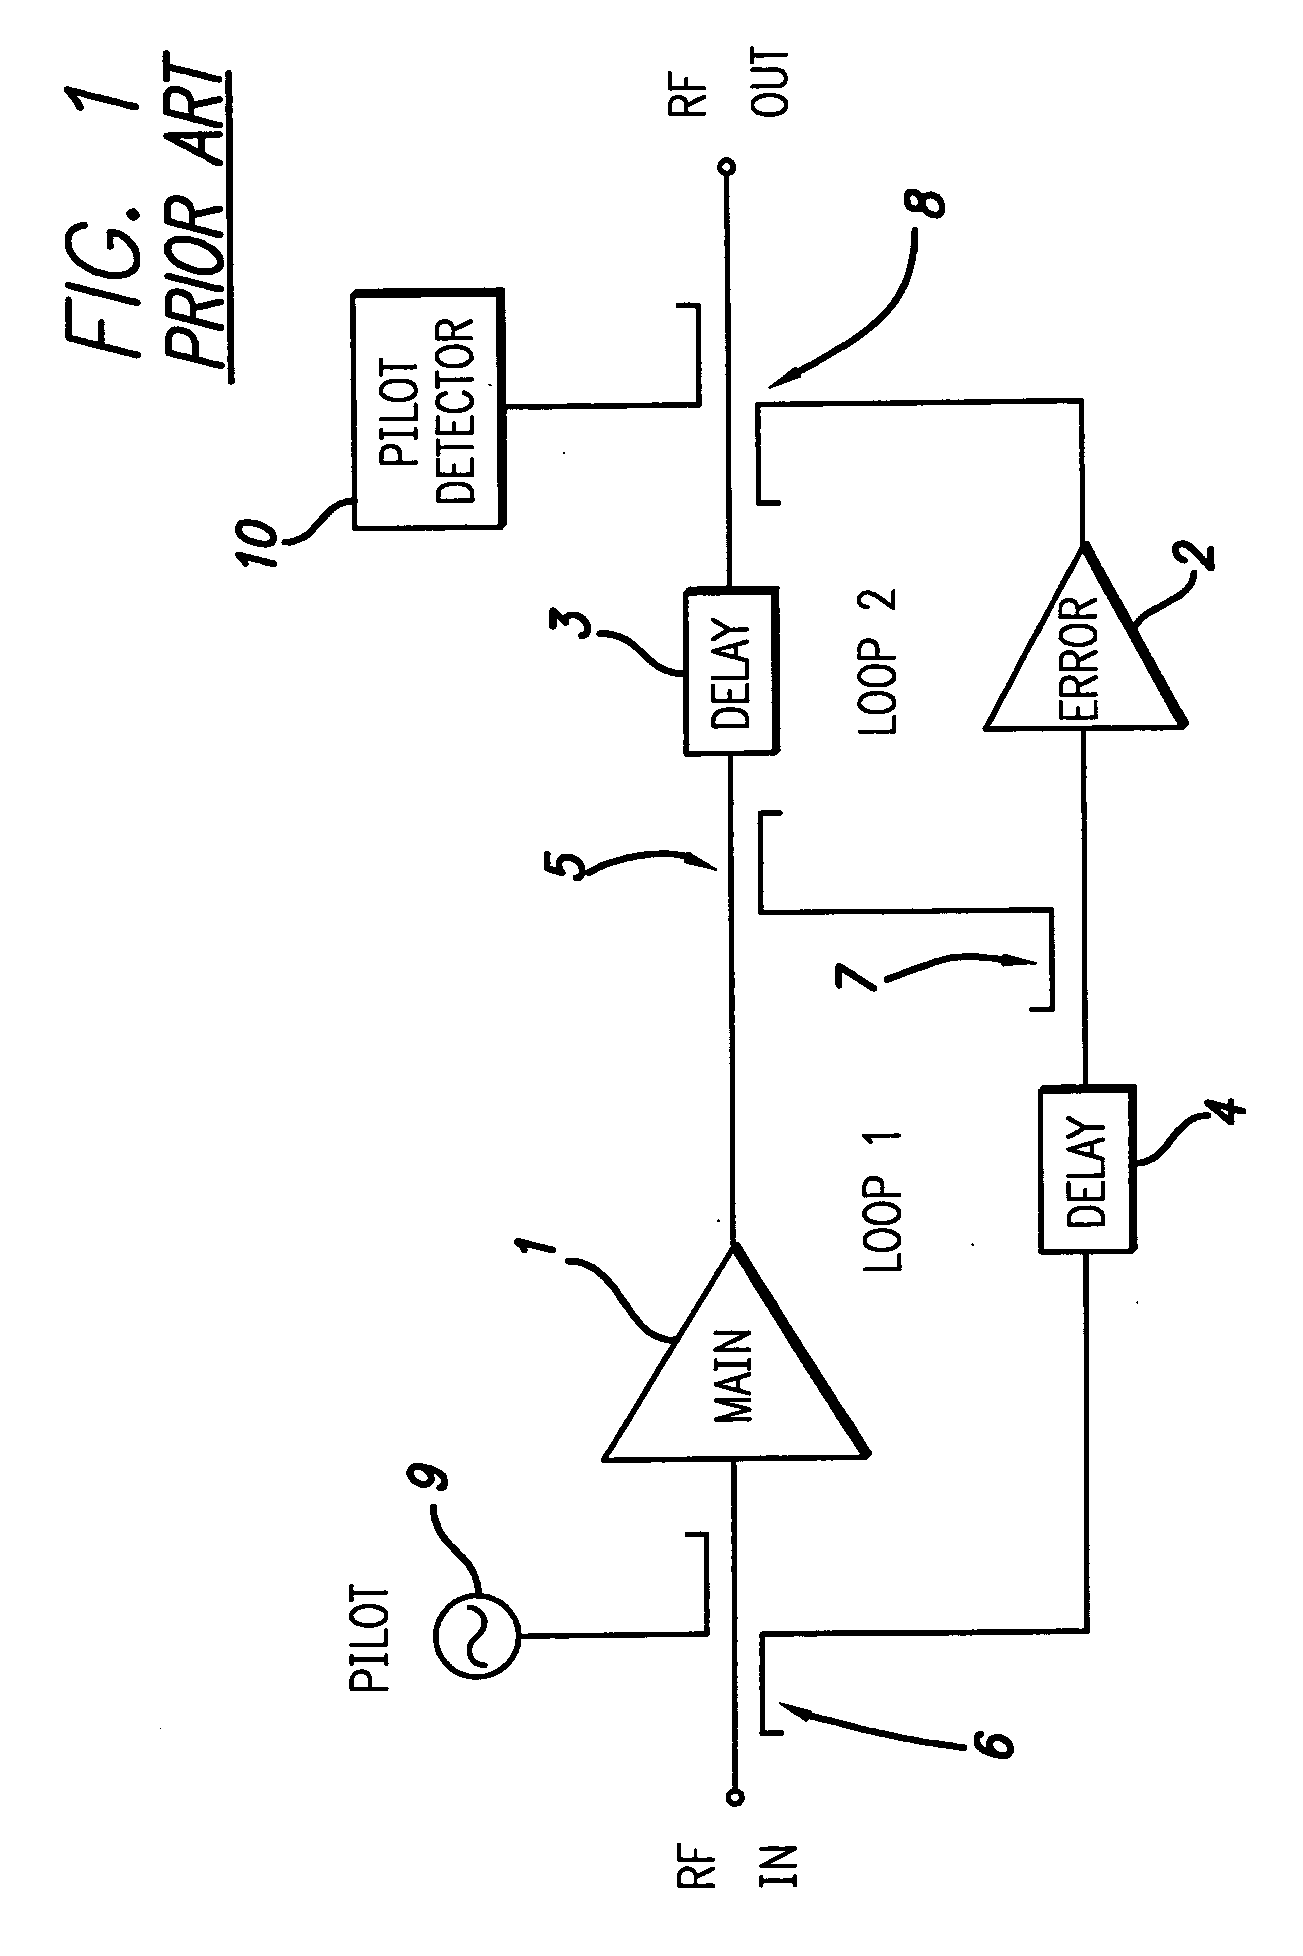 Feed forward amplifier system and method using the pilot frequency from a positive feedback pilot generation and detection circuit to improve second loop convergence